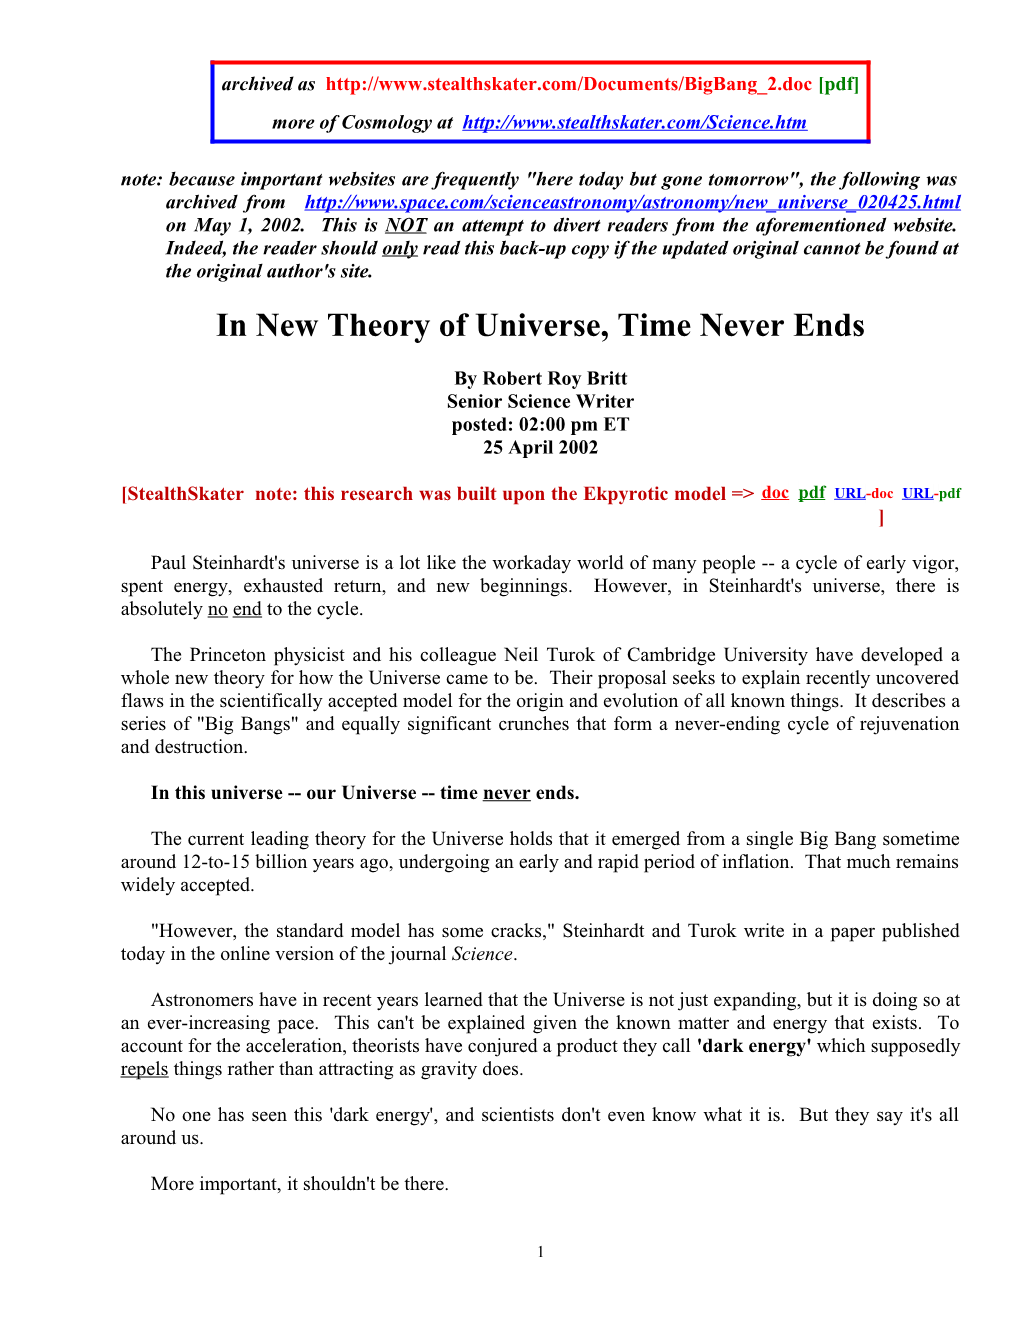 In New Theory of Universe, Time Never Ends